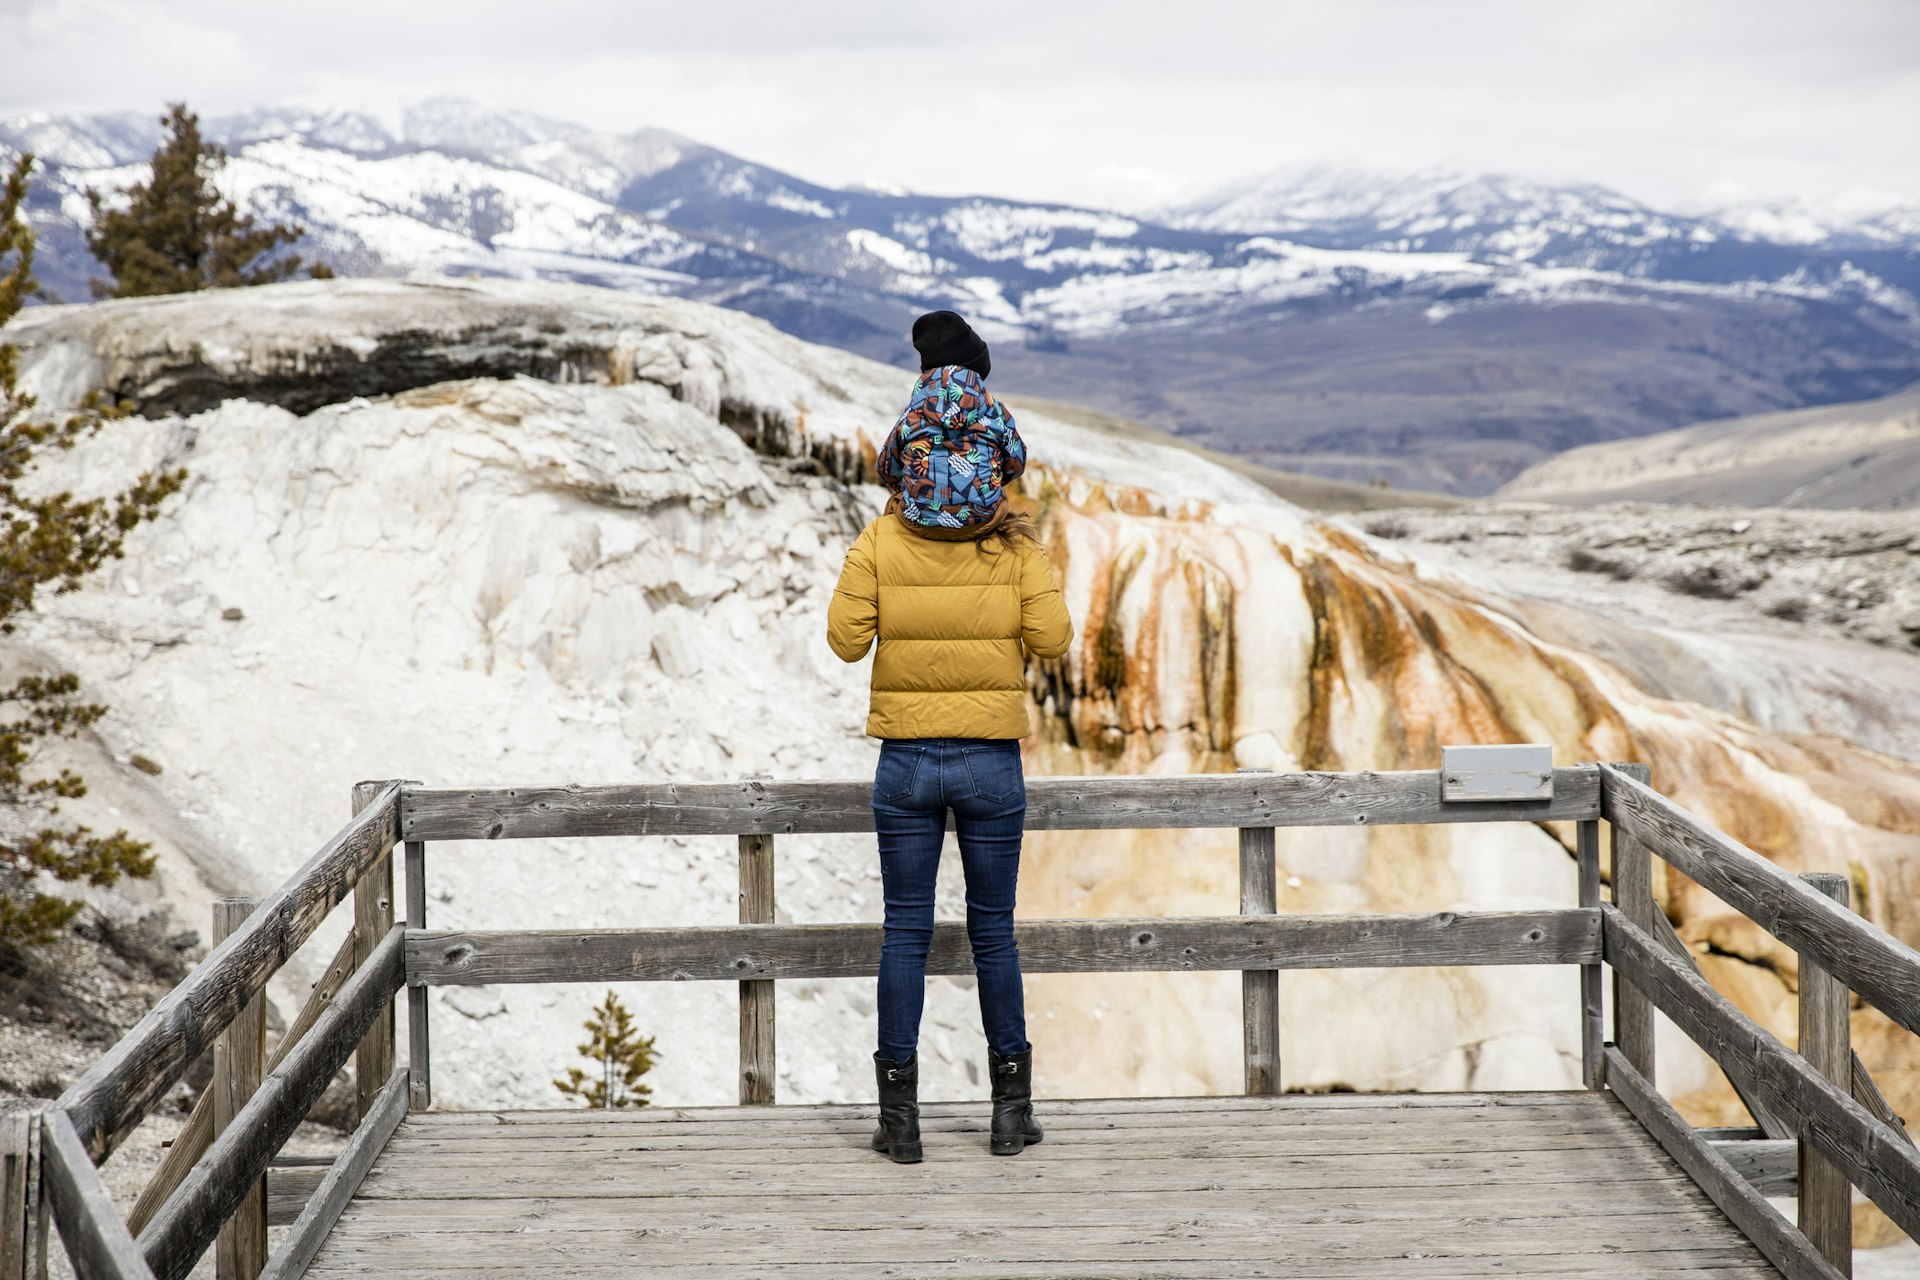 A visitor has a small child on their shoulders as they stand on a boardwalk and face out across the snowy landscape in Yellowstone National Park